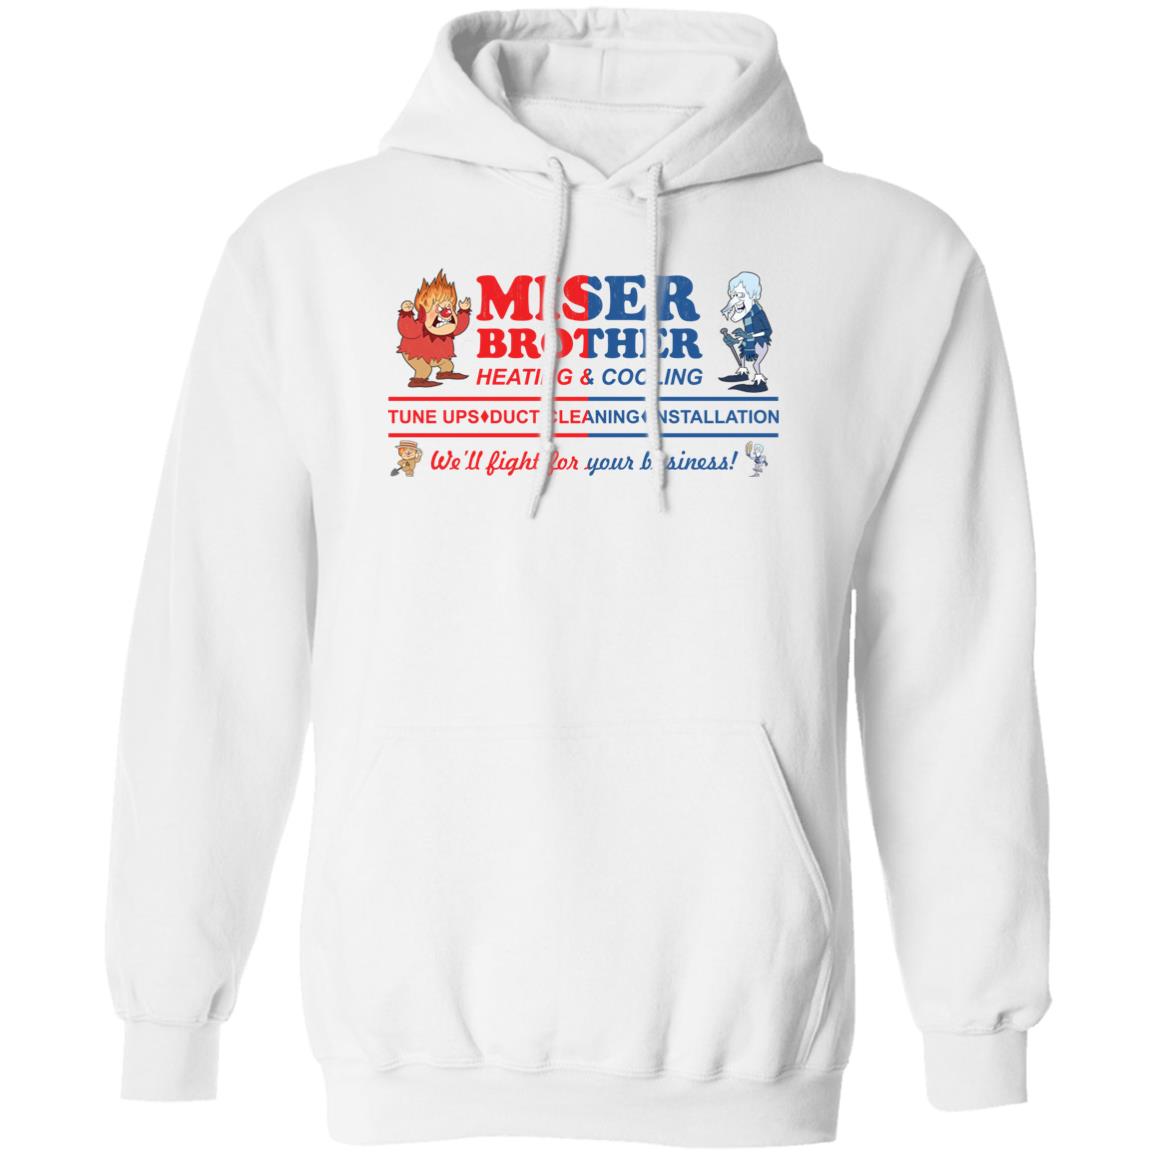 Miser Brother Heating And Cooling Tune Ups Duct Cleaning Shirt 1